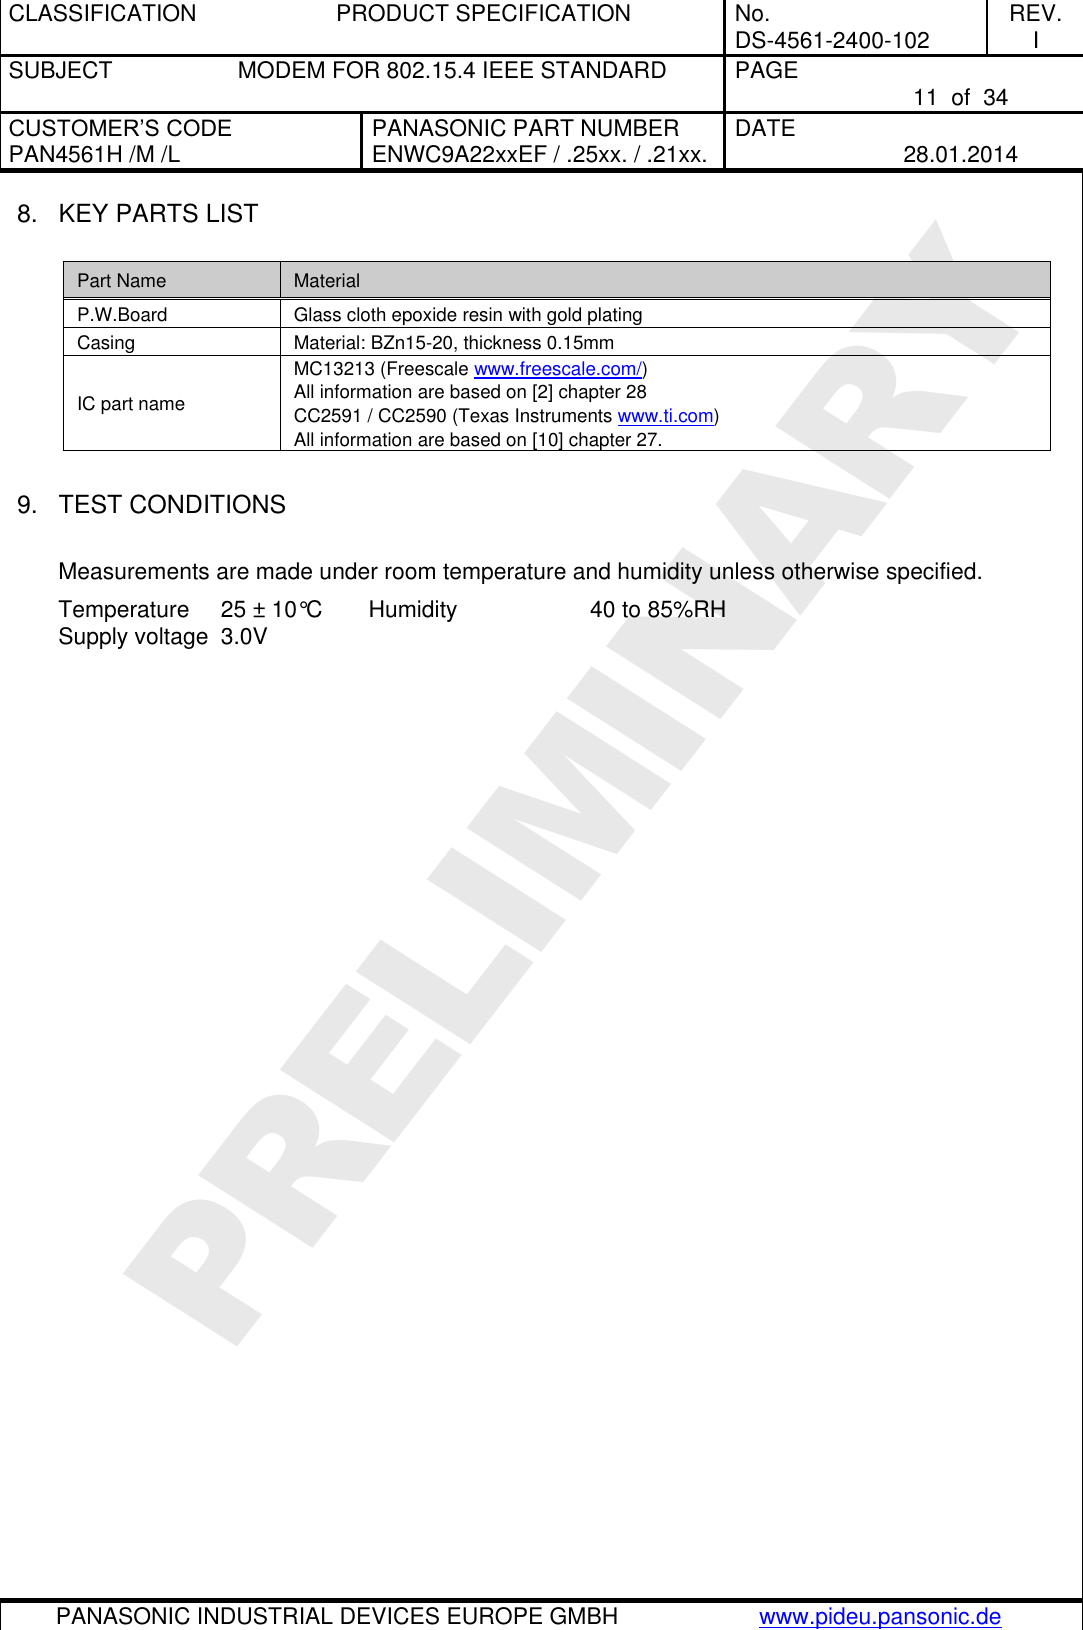 CLASSIFICATION  PRODUCT SPECIFICATION  No. DS-4561-2400-102 REV. I SUBJECT  MODEM FOR 802.15.4 IEEE STANDARD  PAGE   11  of  34 CUSTOMER’S CODE PAN4561H /M /L PANASONIC PART NUMBER ENWC9A22xxEF / .25xx. / .21xx. DATE   28.01.2014   PANASONIC INDUSTRIAL DEVICES EUROPE GMBH www.pideu.pansonic.de  PRELIMINARY 8.  KEY PARTS LIST  Part Name Material P.W.Board Glass cloth epoxide resin with gold plating Casing Material: BZn15-20, thickness 0.15mm IC part name MC13213 (Freescale www.freescale.com/) All information are based on [2] chapter 28 CC2591 / CC2590 (Texas Instruments www.ti.com) All information are based on [10] chapter 27.  9.  TEST CONDITIONS  Measurements are made under room temperature and humidity unless otherwise specified. Temperature 25 ± 10°C  Humidity    40 to 85%RH Supply voltage  3.0V   